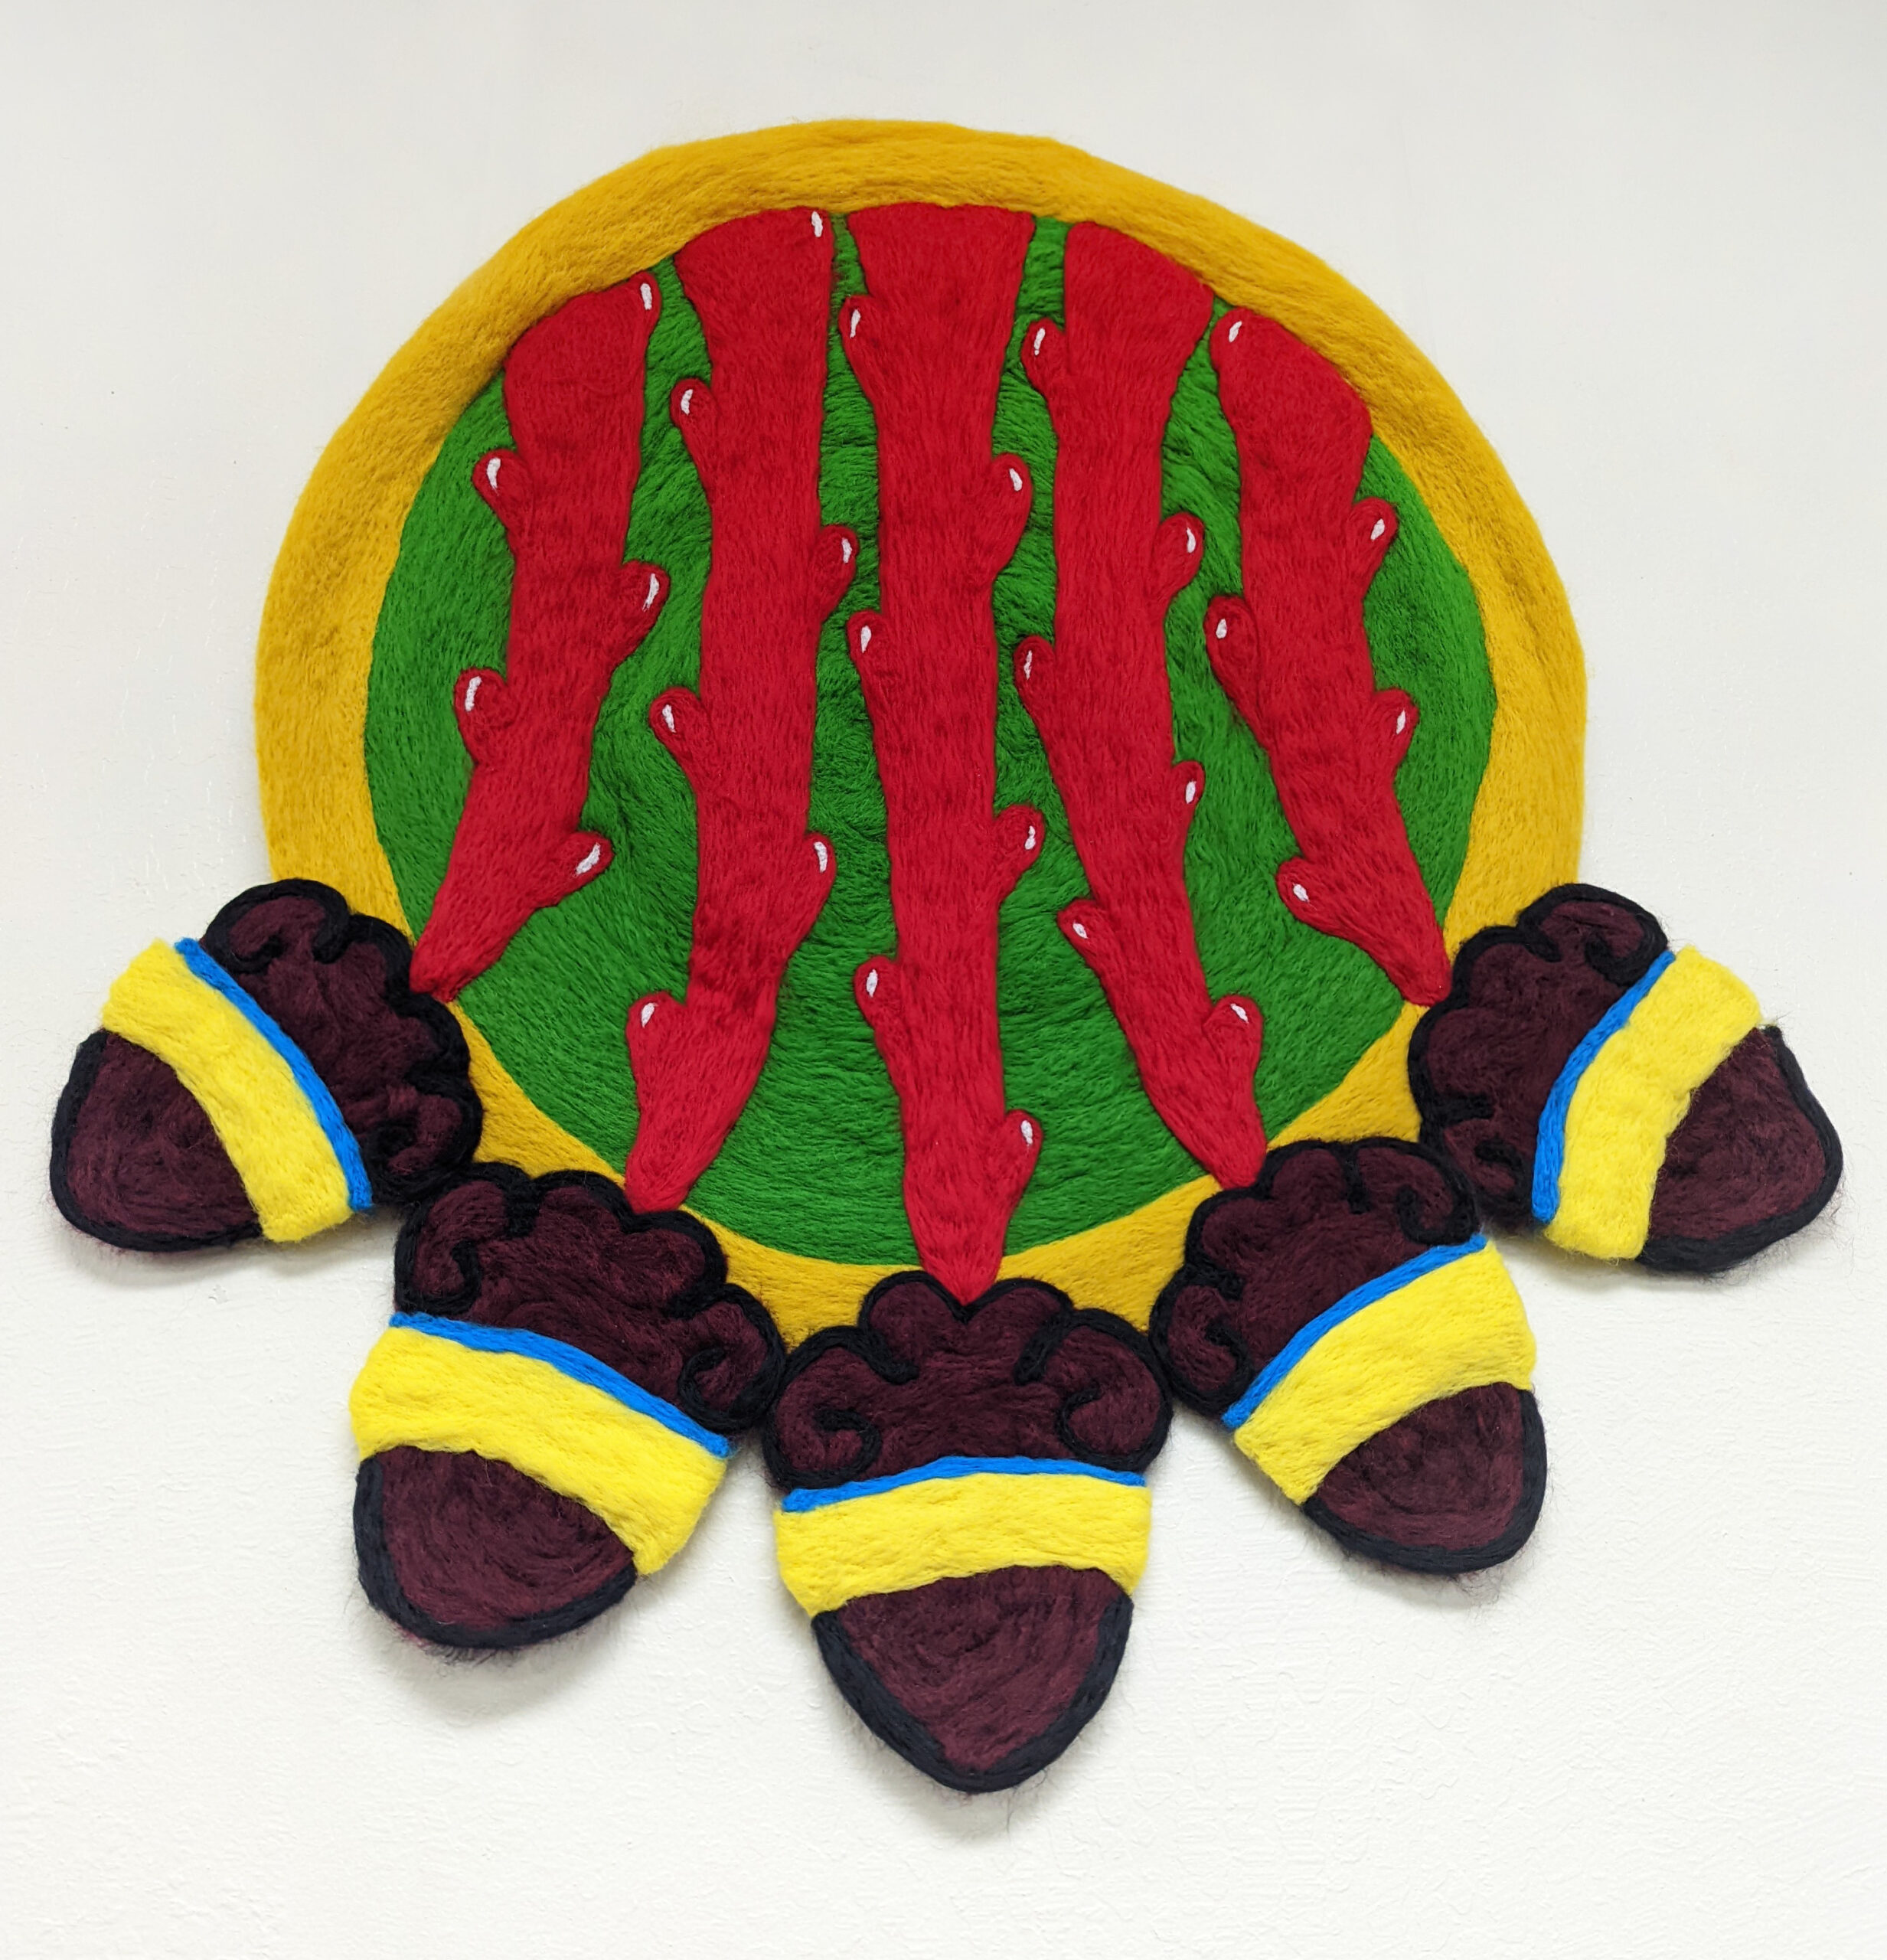 A felted wool sculpture of an Aztec shield featuring five hearts on a white background.